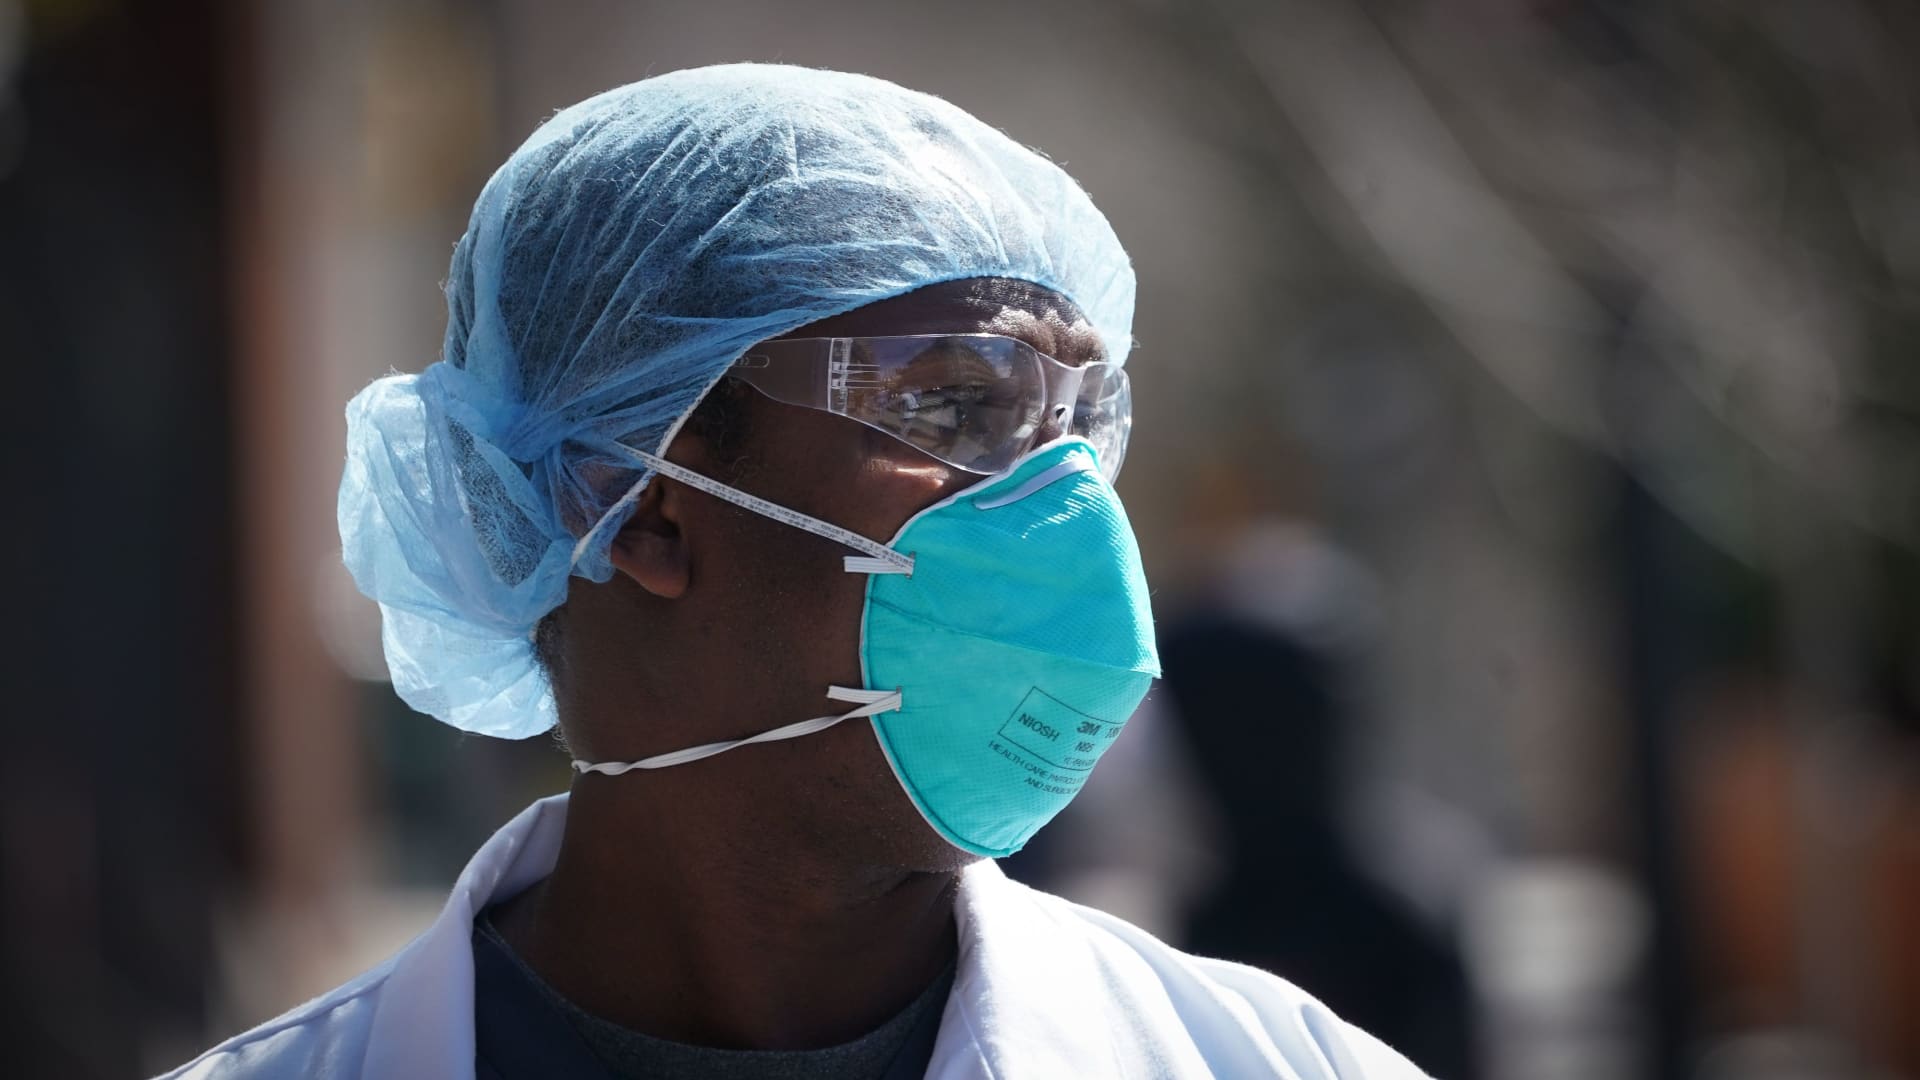 A healthcare worker wears a N95 respirator with two straps that fit around the head.